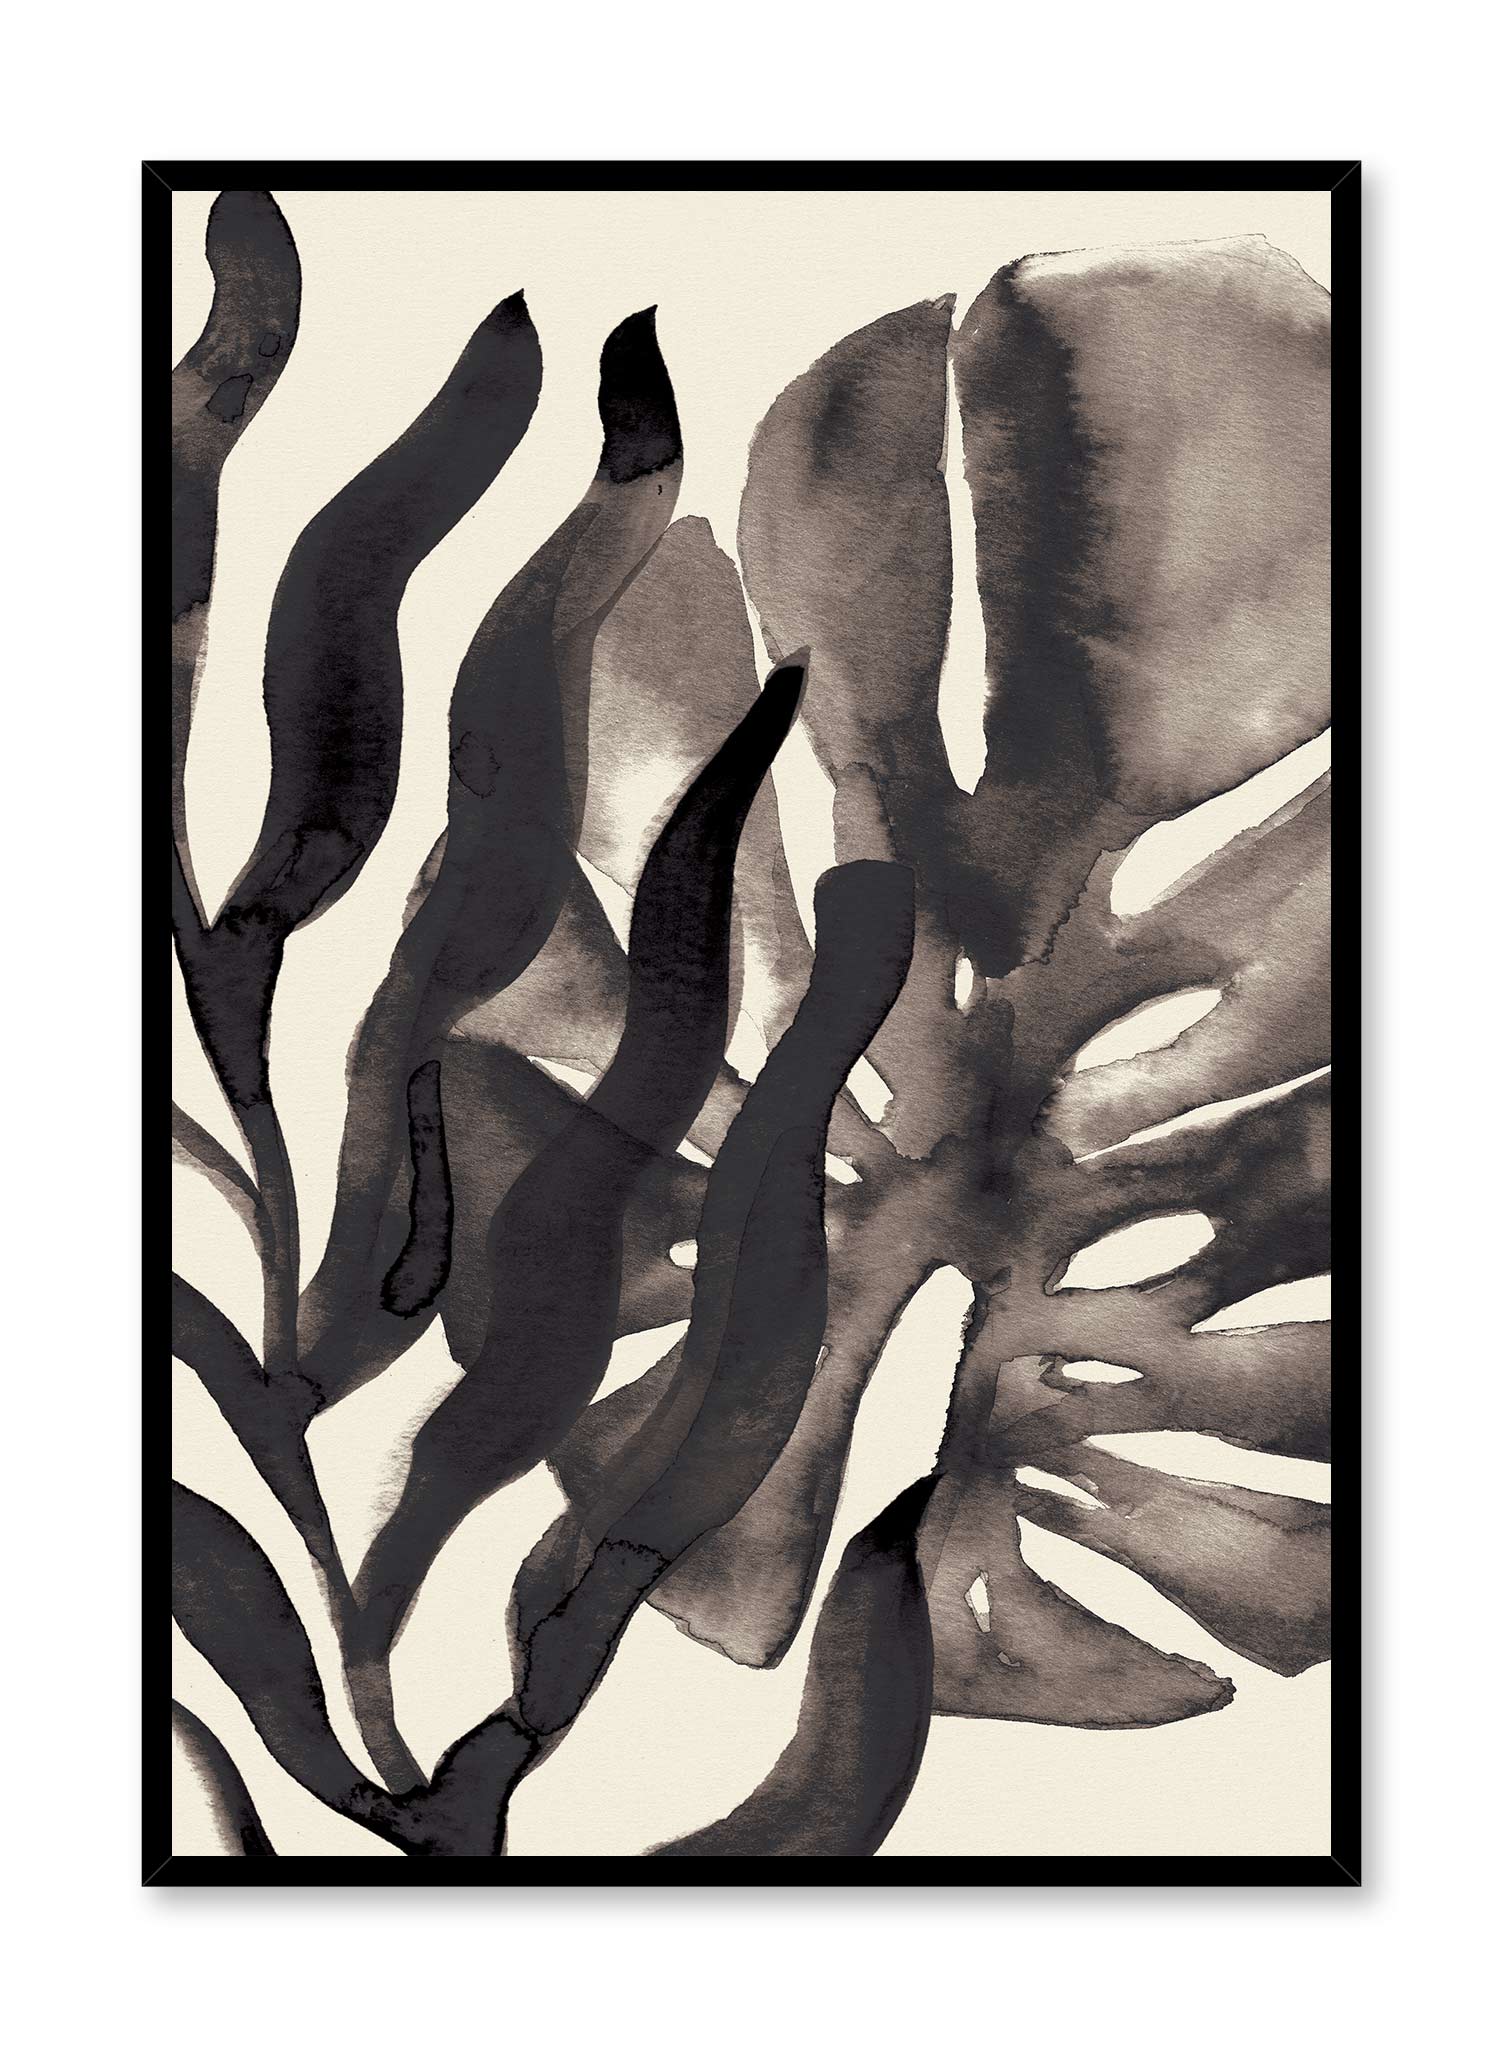 Noctural Monstera is a minimalist illustration of the close-up shot of a giant black monstera leaf by Opposite Wall.